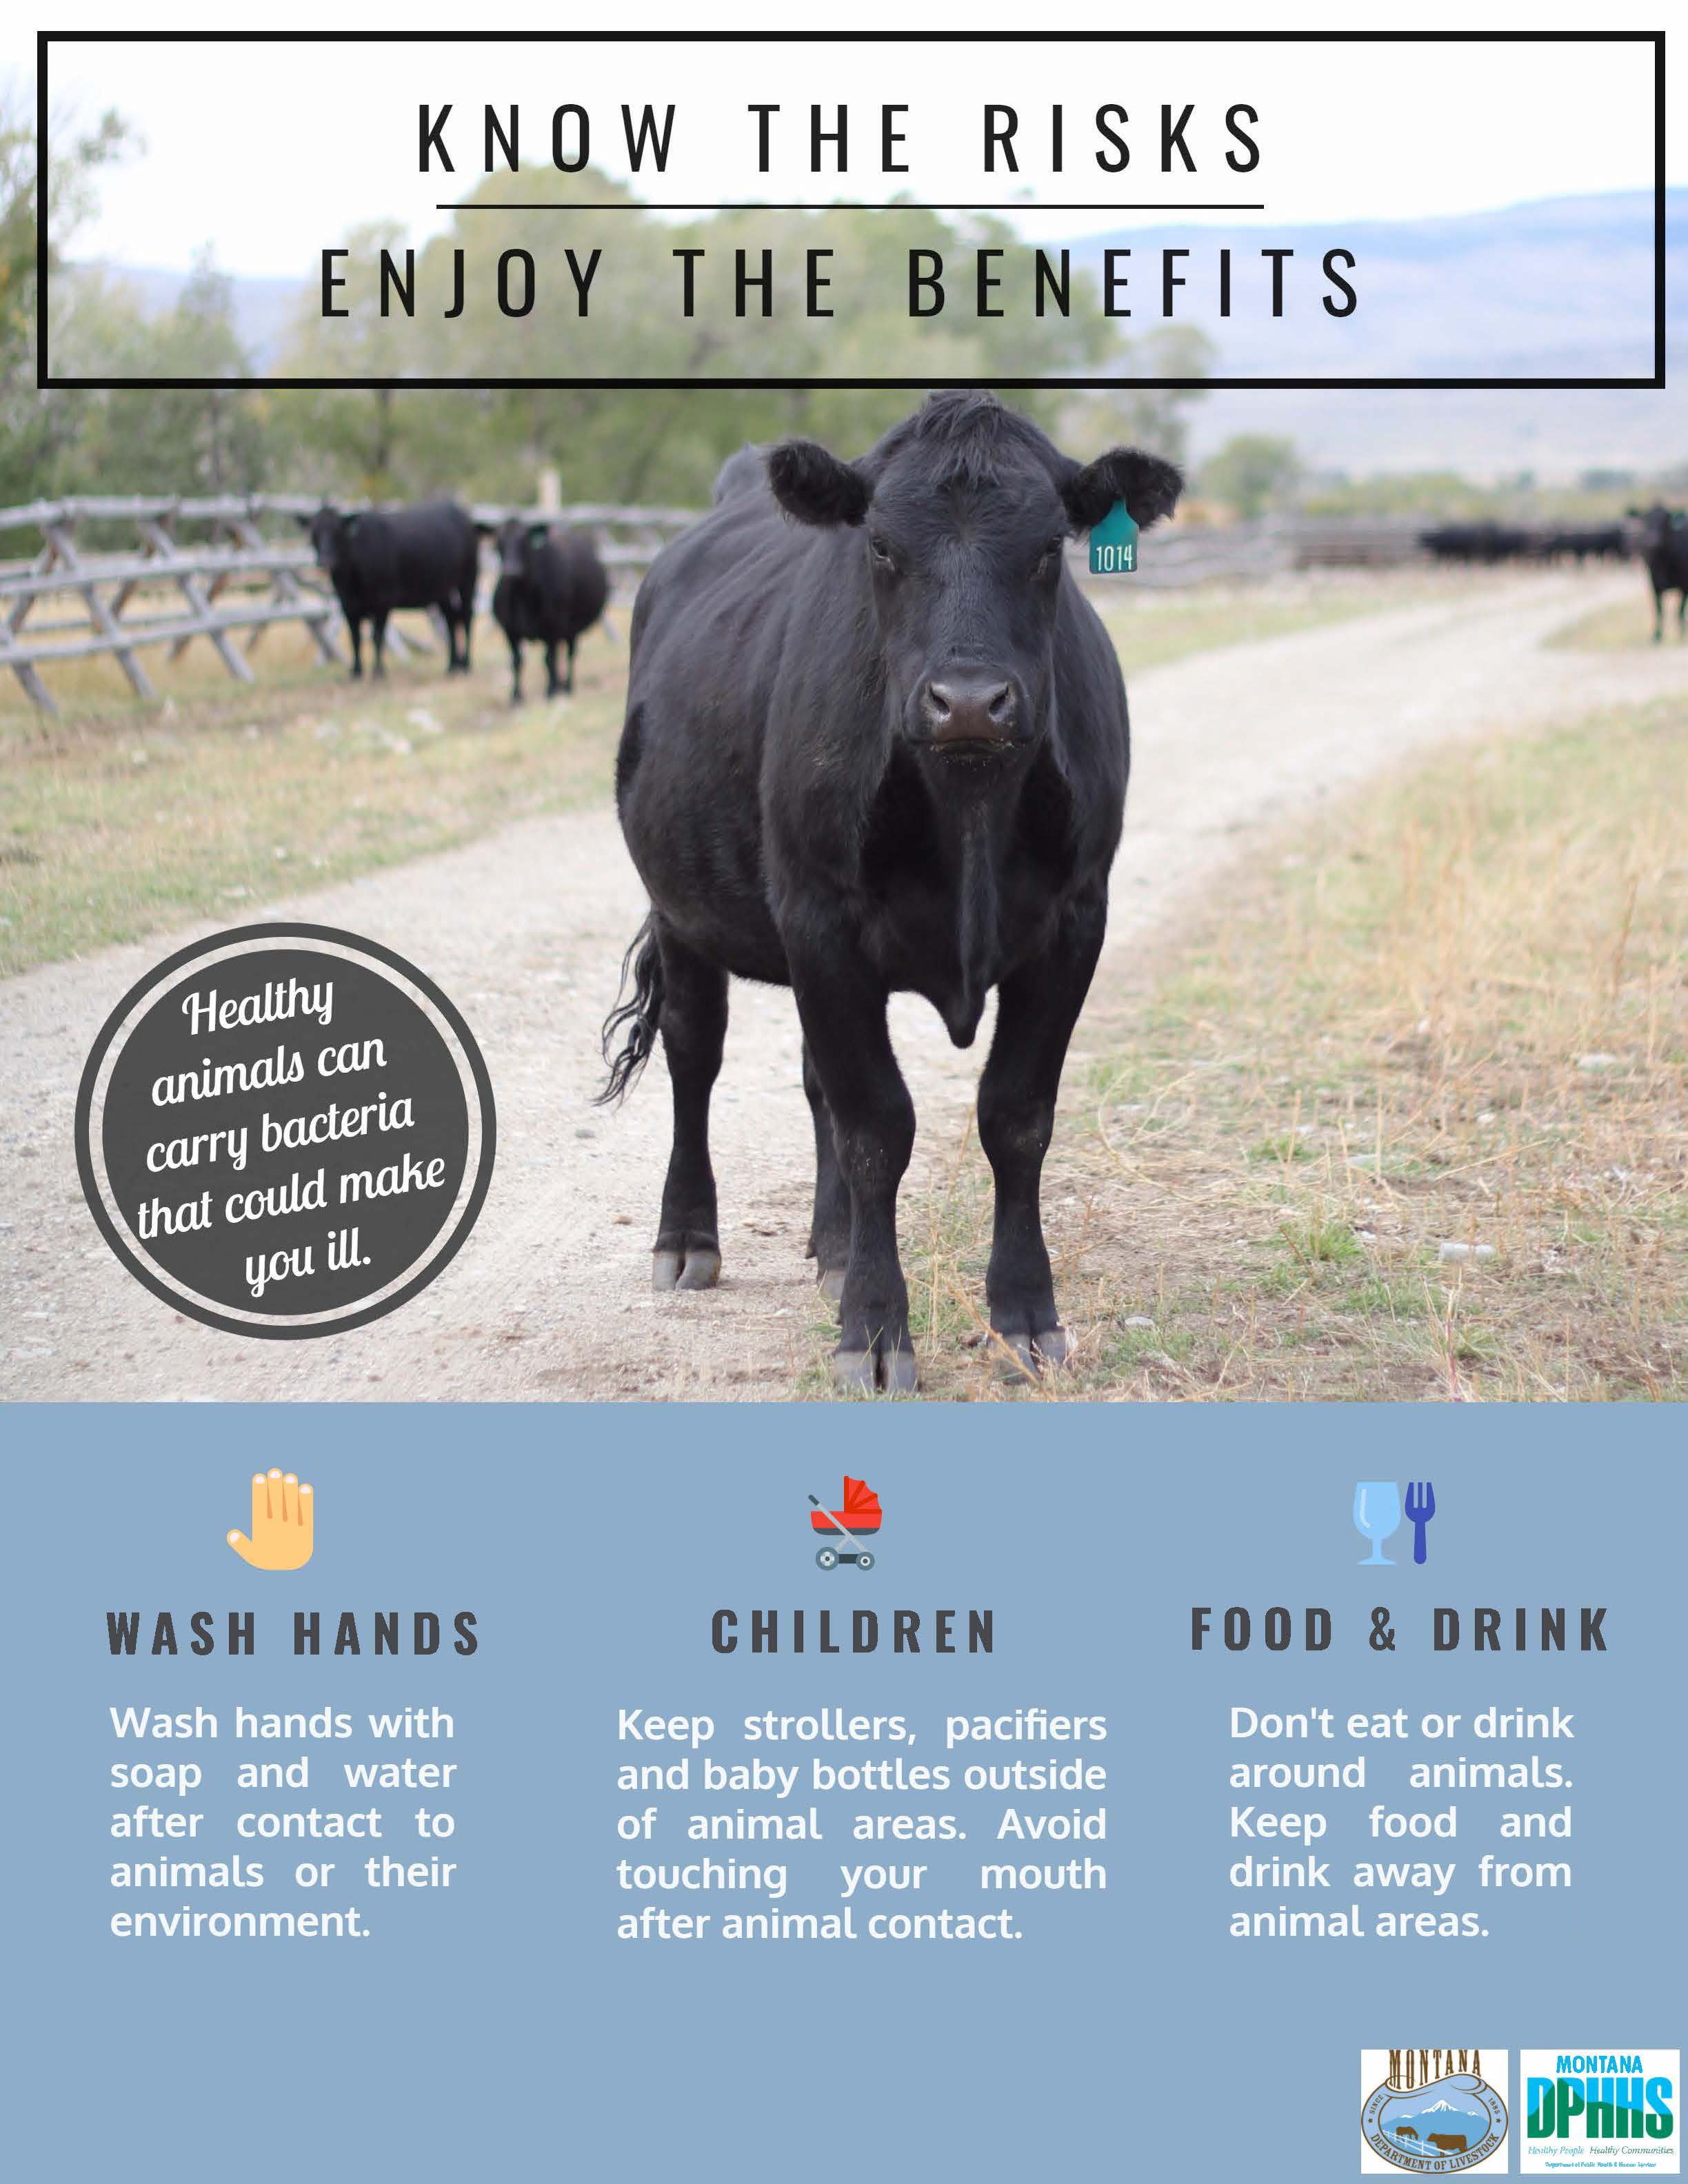 Know the risks, enjoy the benefits (cows)